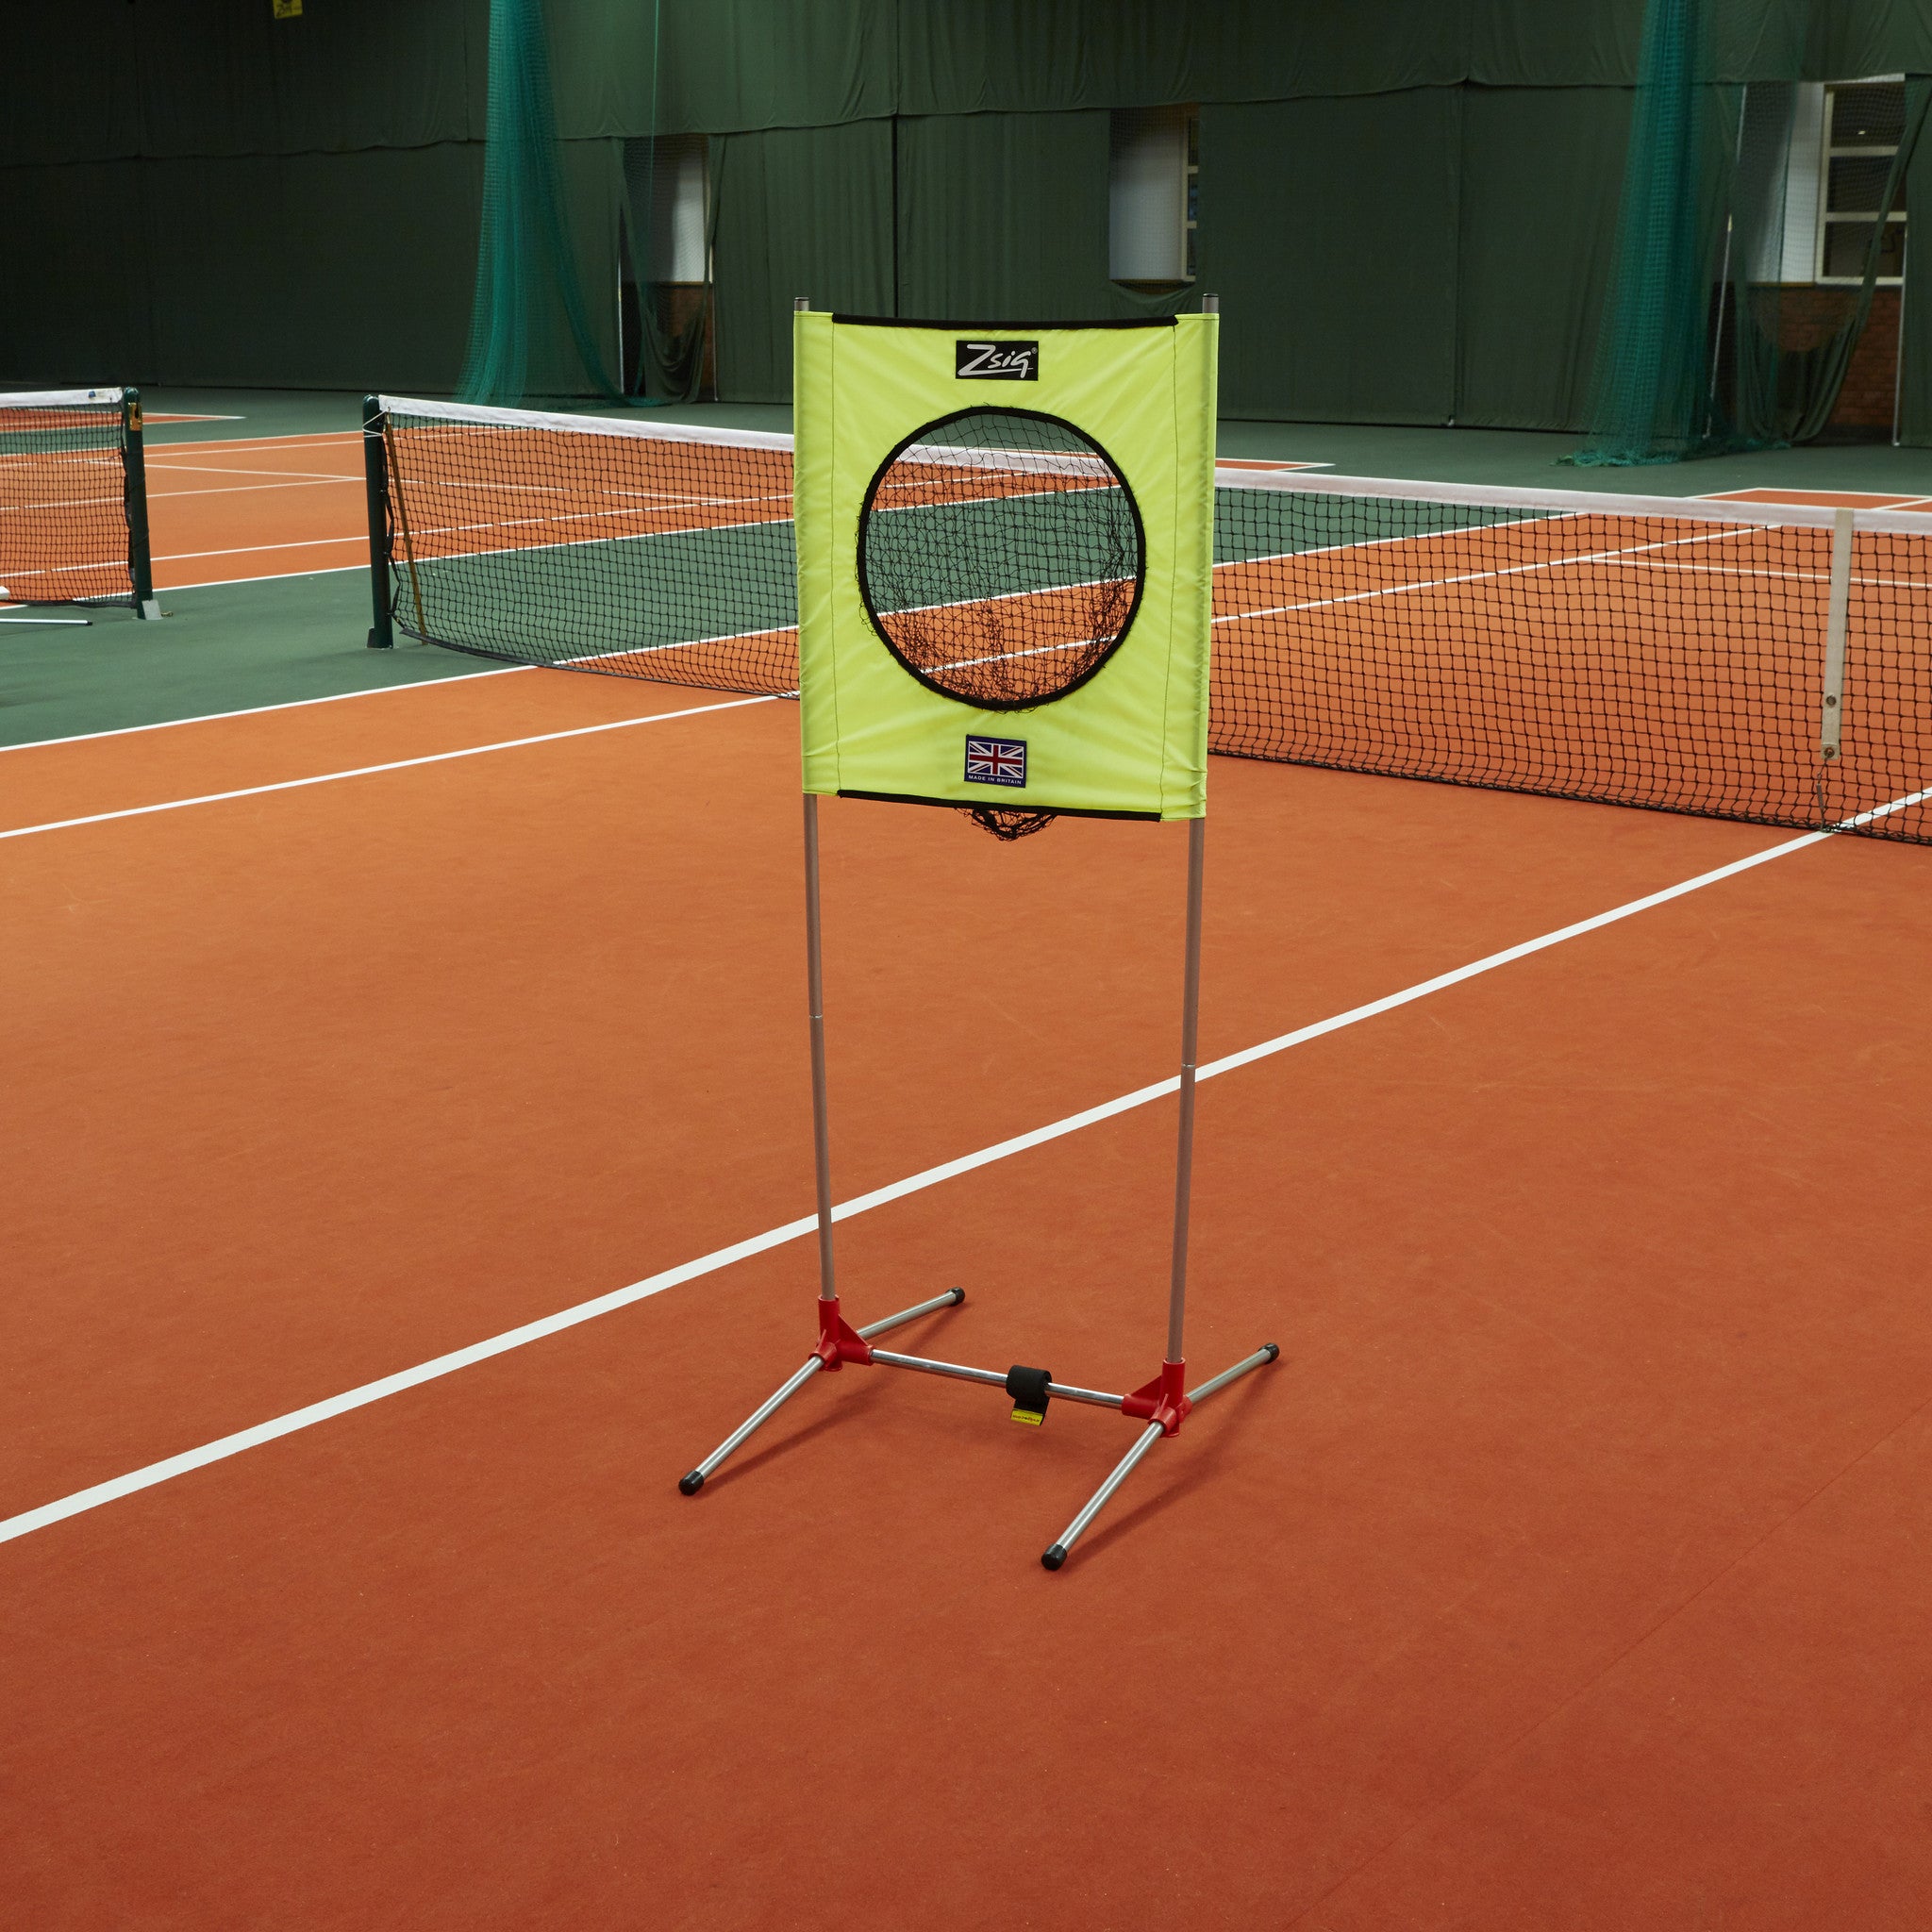 Zsig portable Target Trainer on the tennis court.